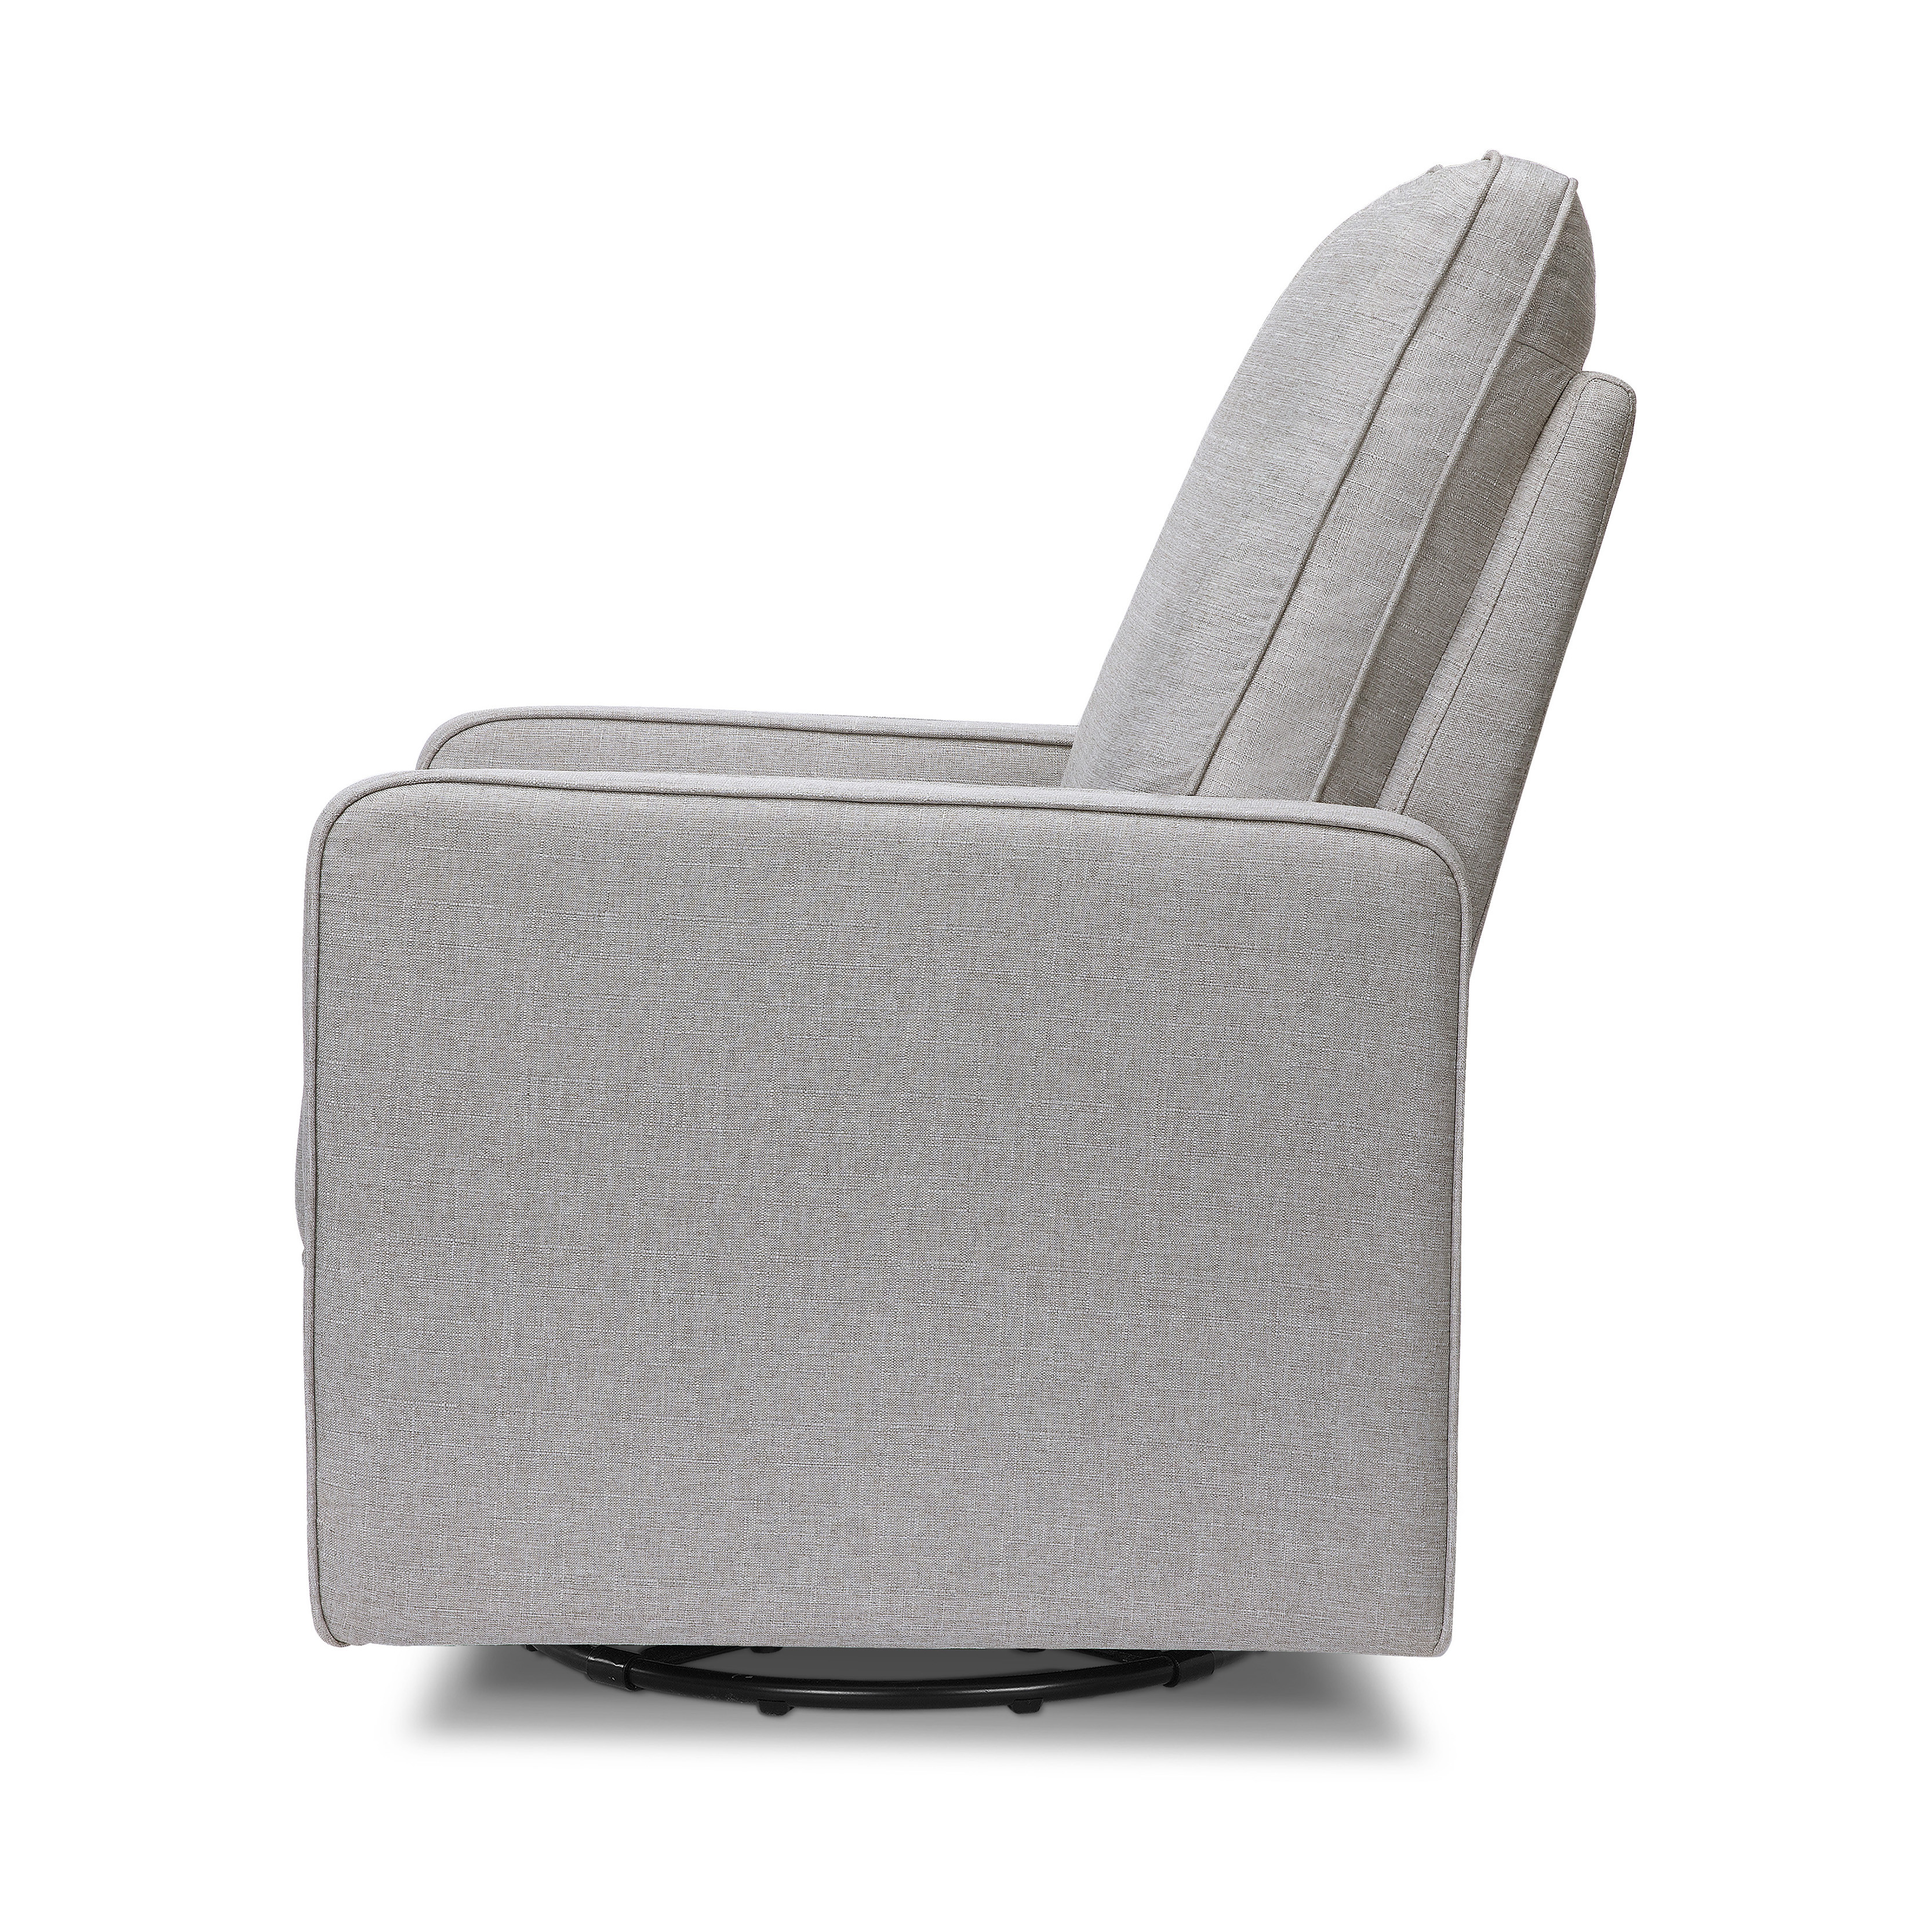 DaVinci Casey Pillowback Swivel Glider Chair in Misty Gray - image 5 of 7